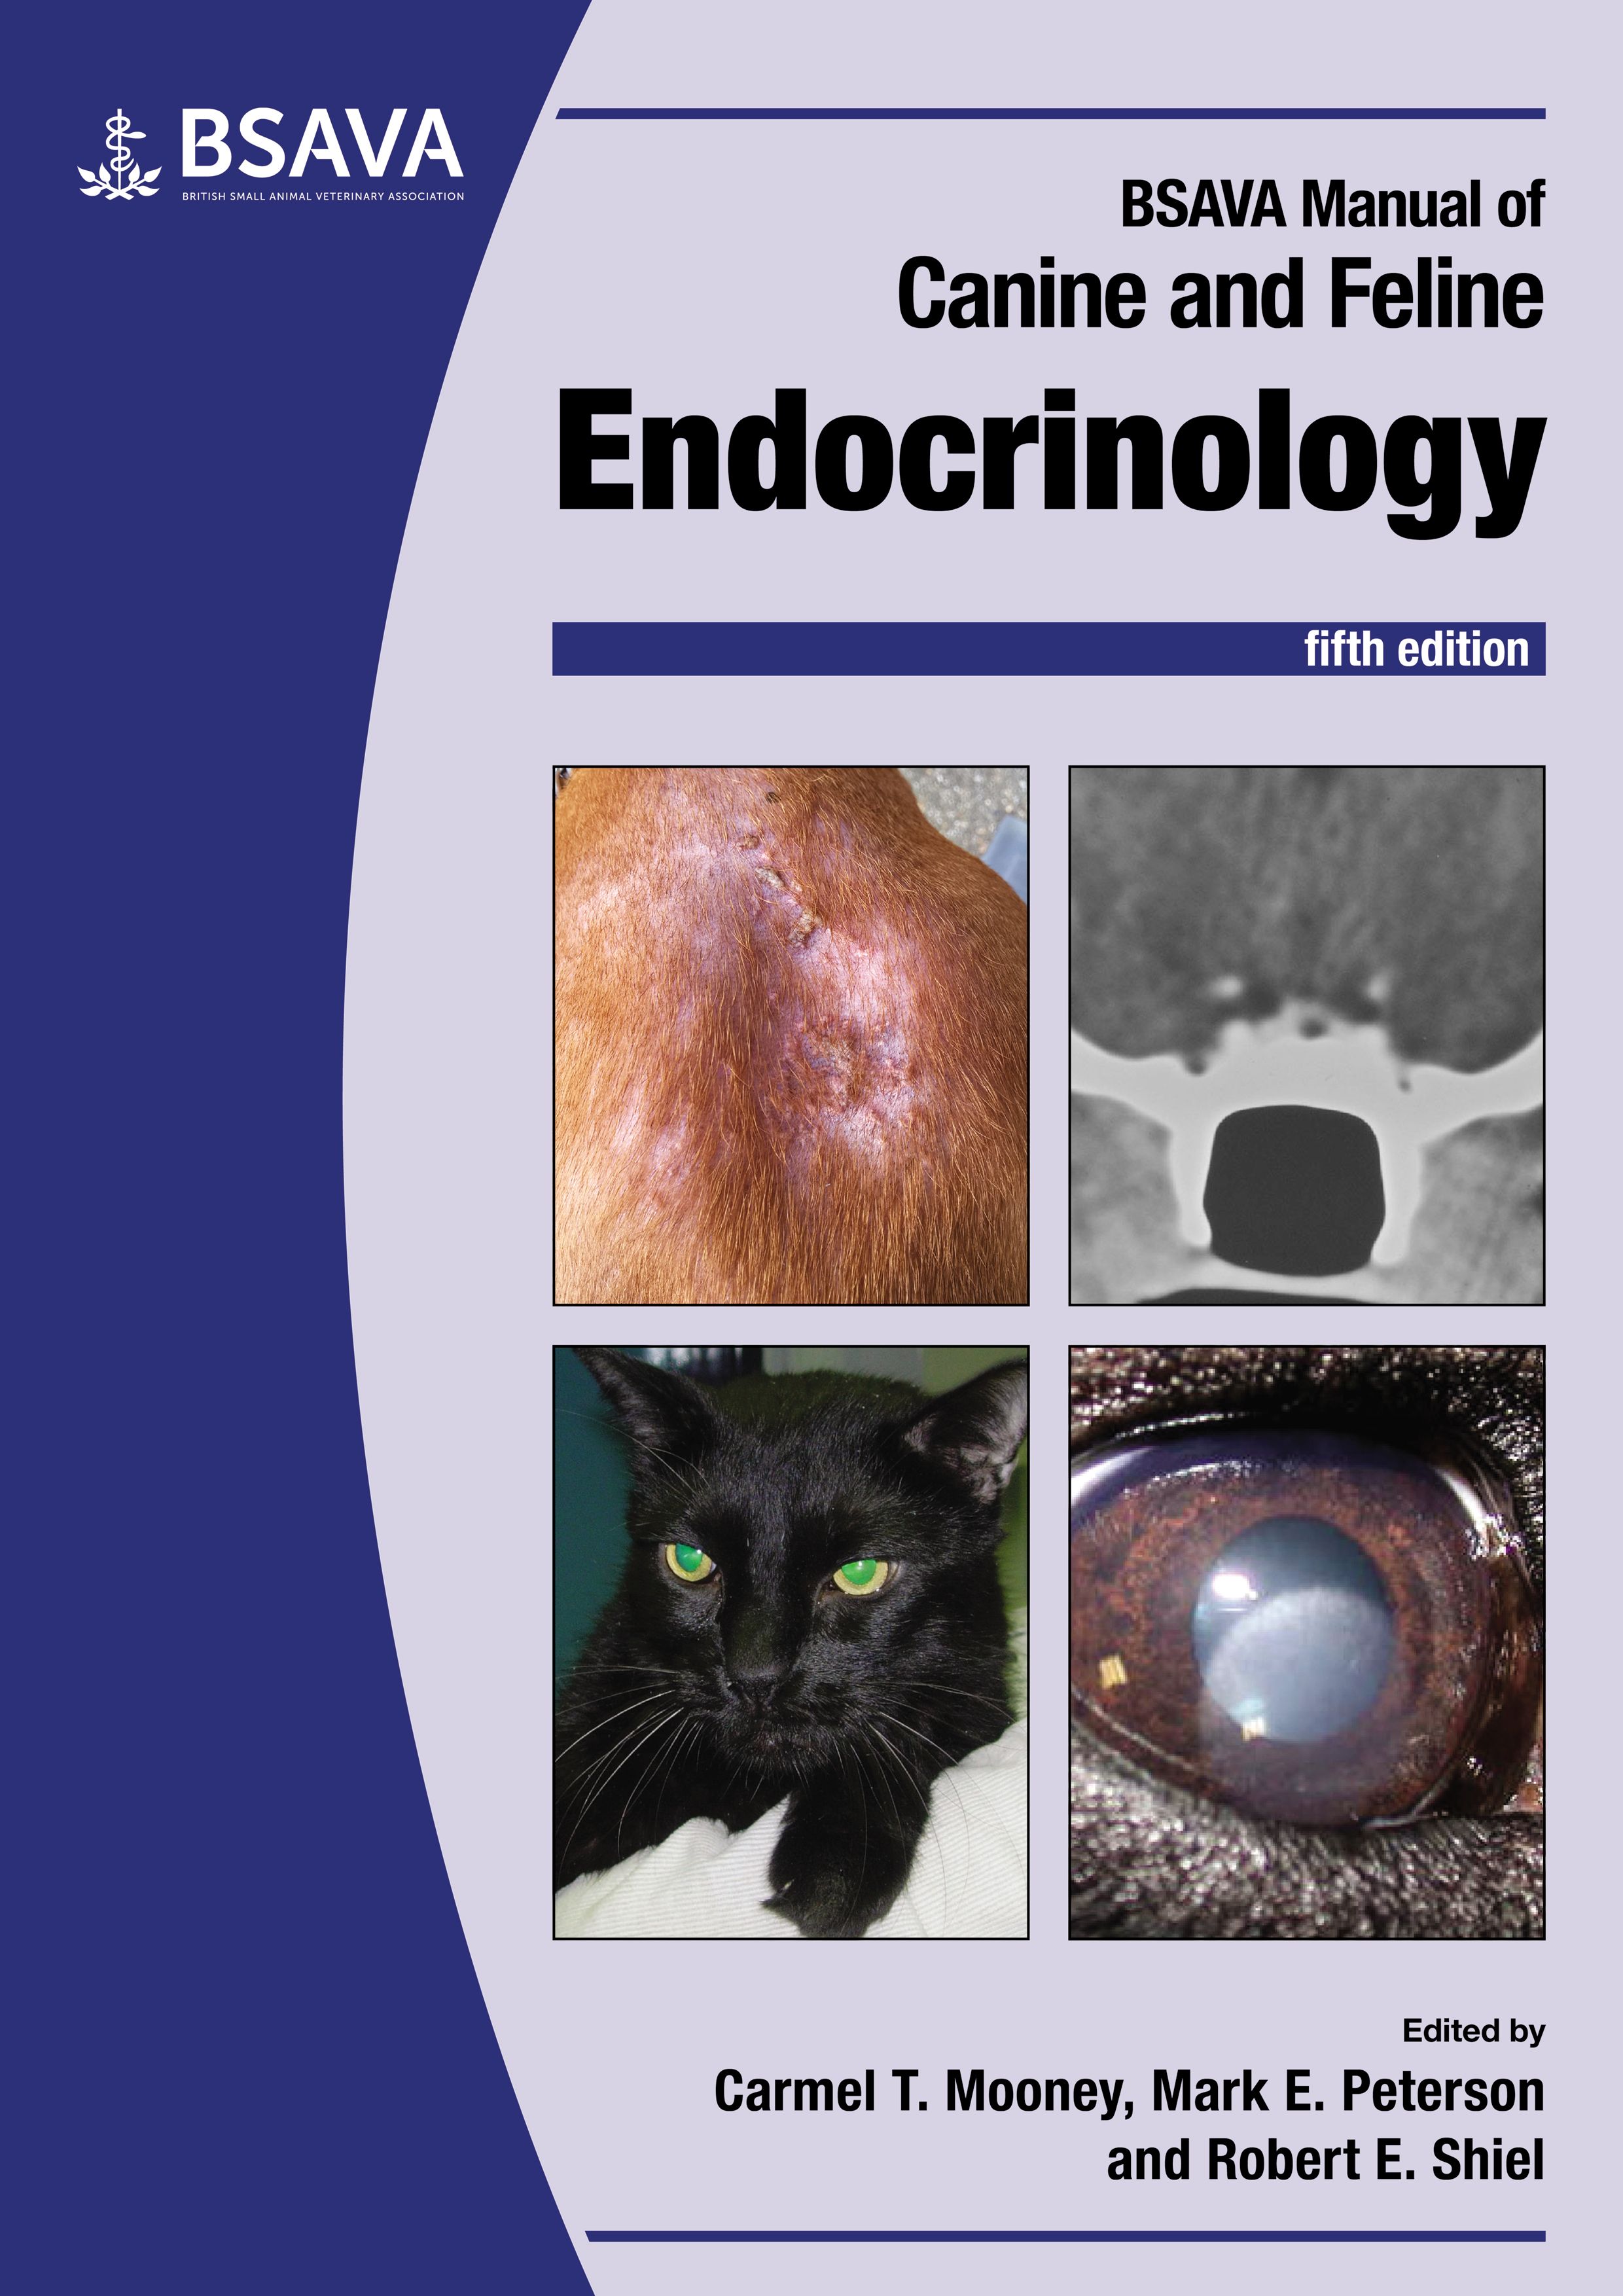 In case you missed it – new Endocrinology edition